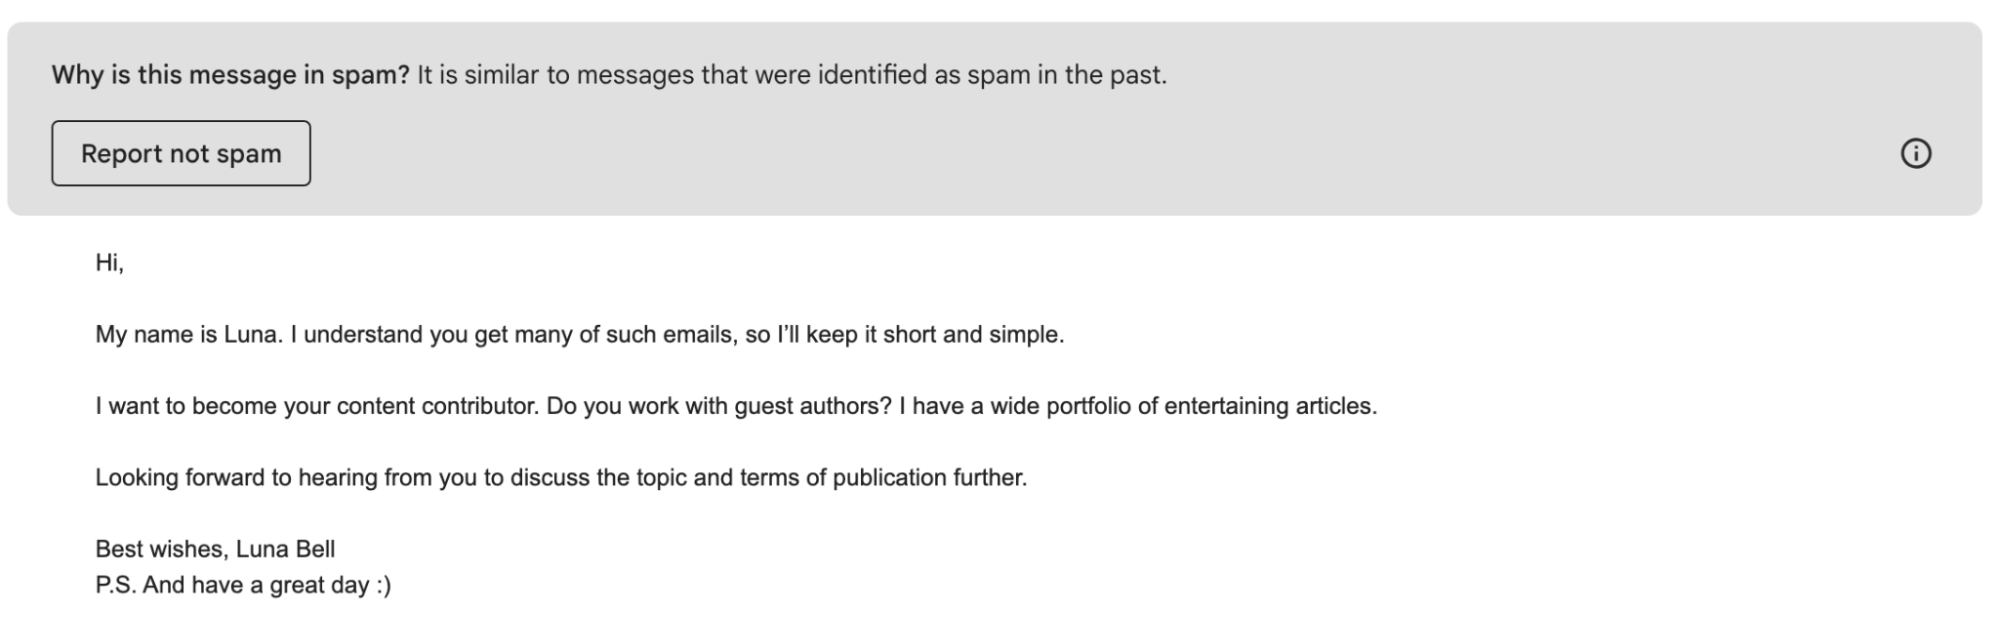 An example of a cold email that landed in spam because it looks like unwanted bulk email